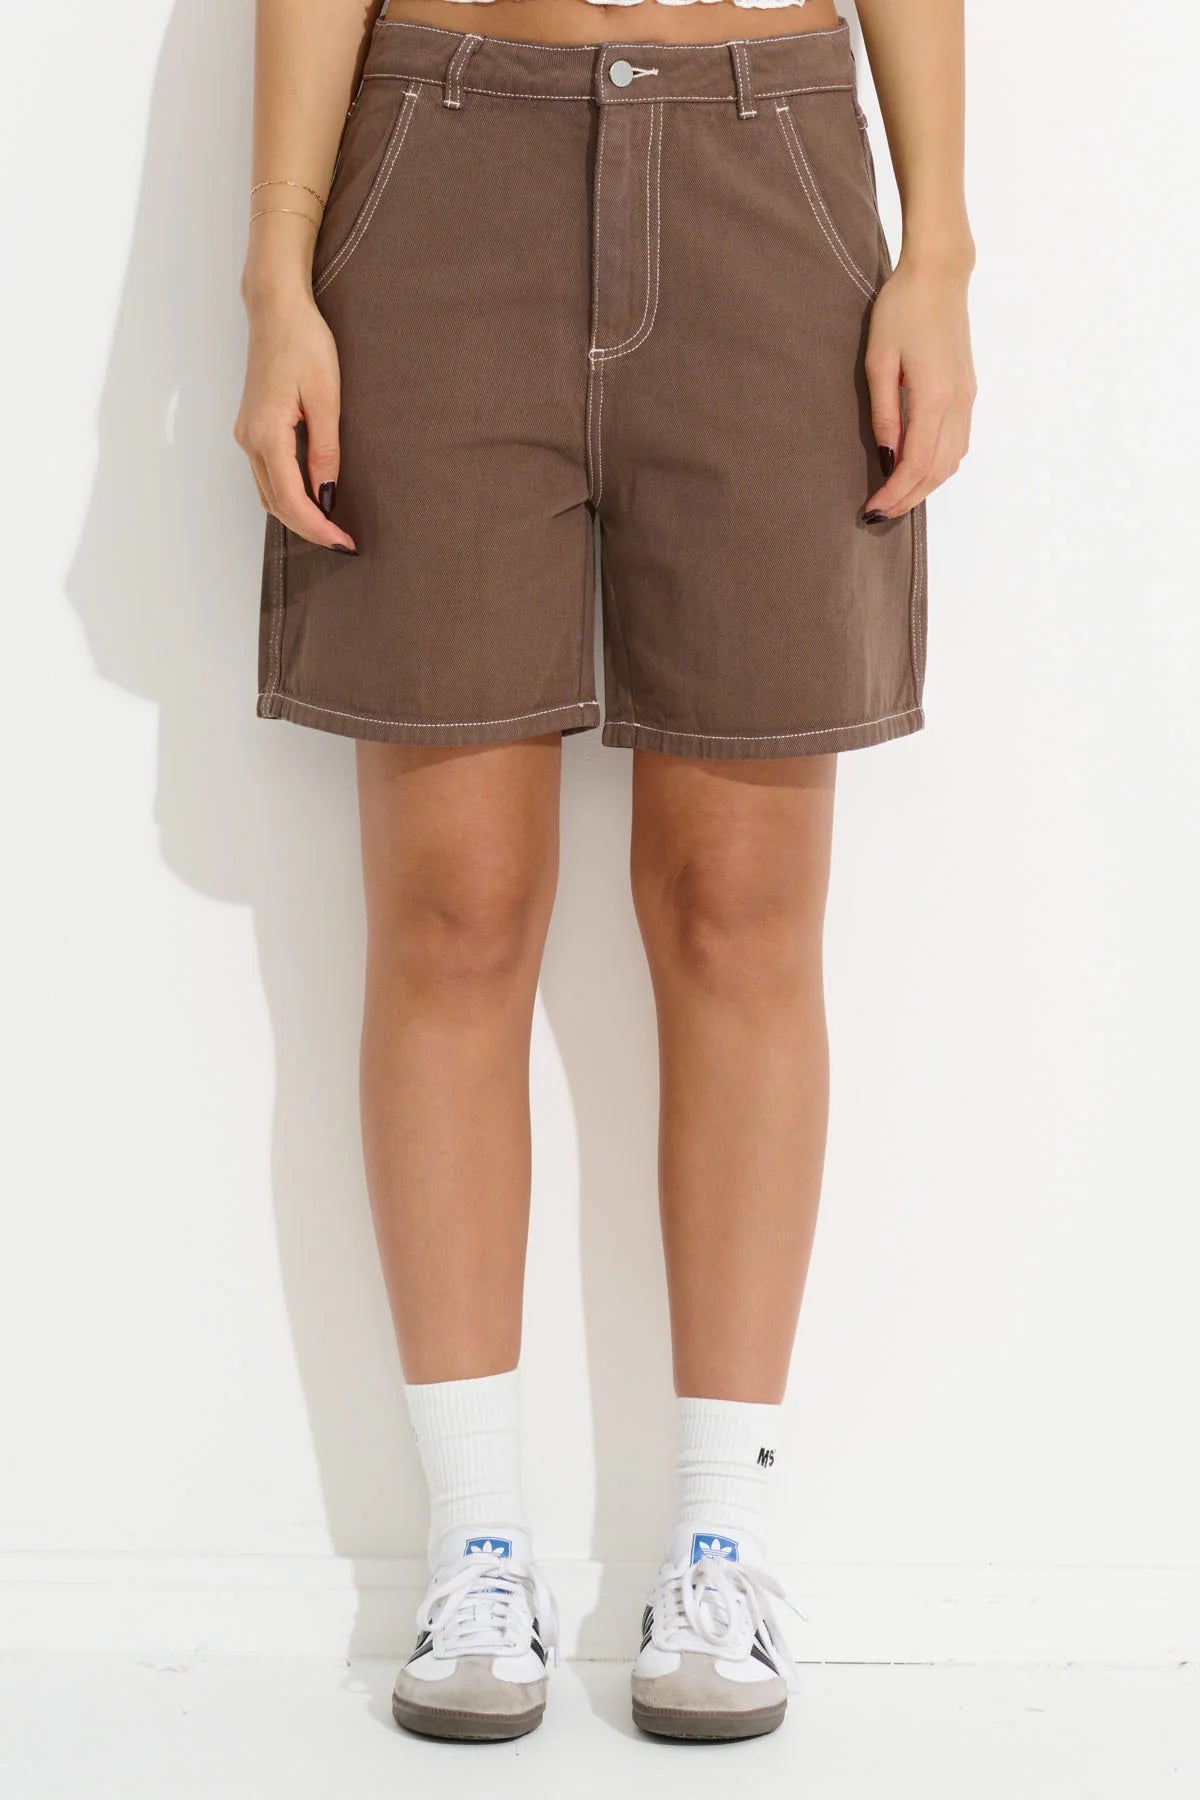 Heavenly People Shorts - Chocolate